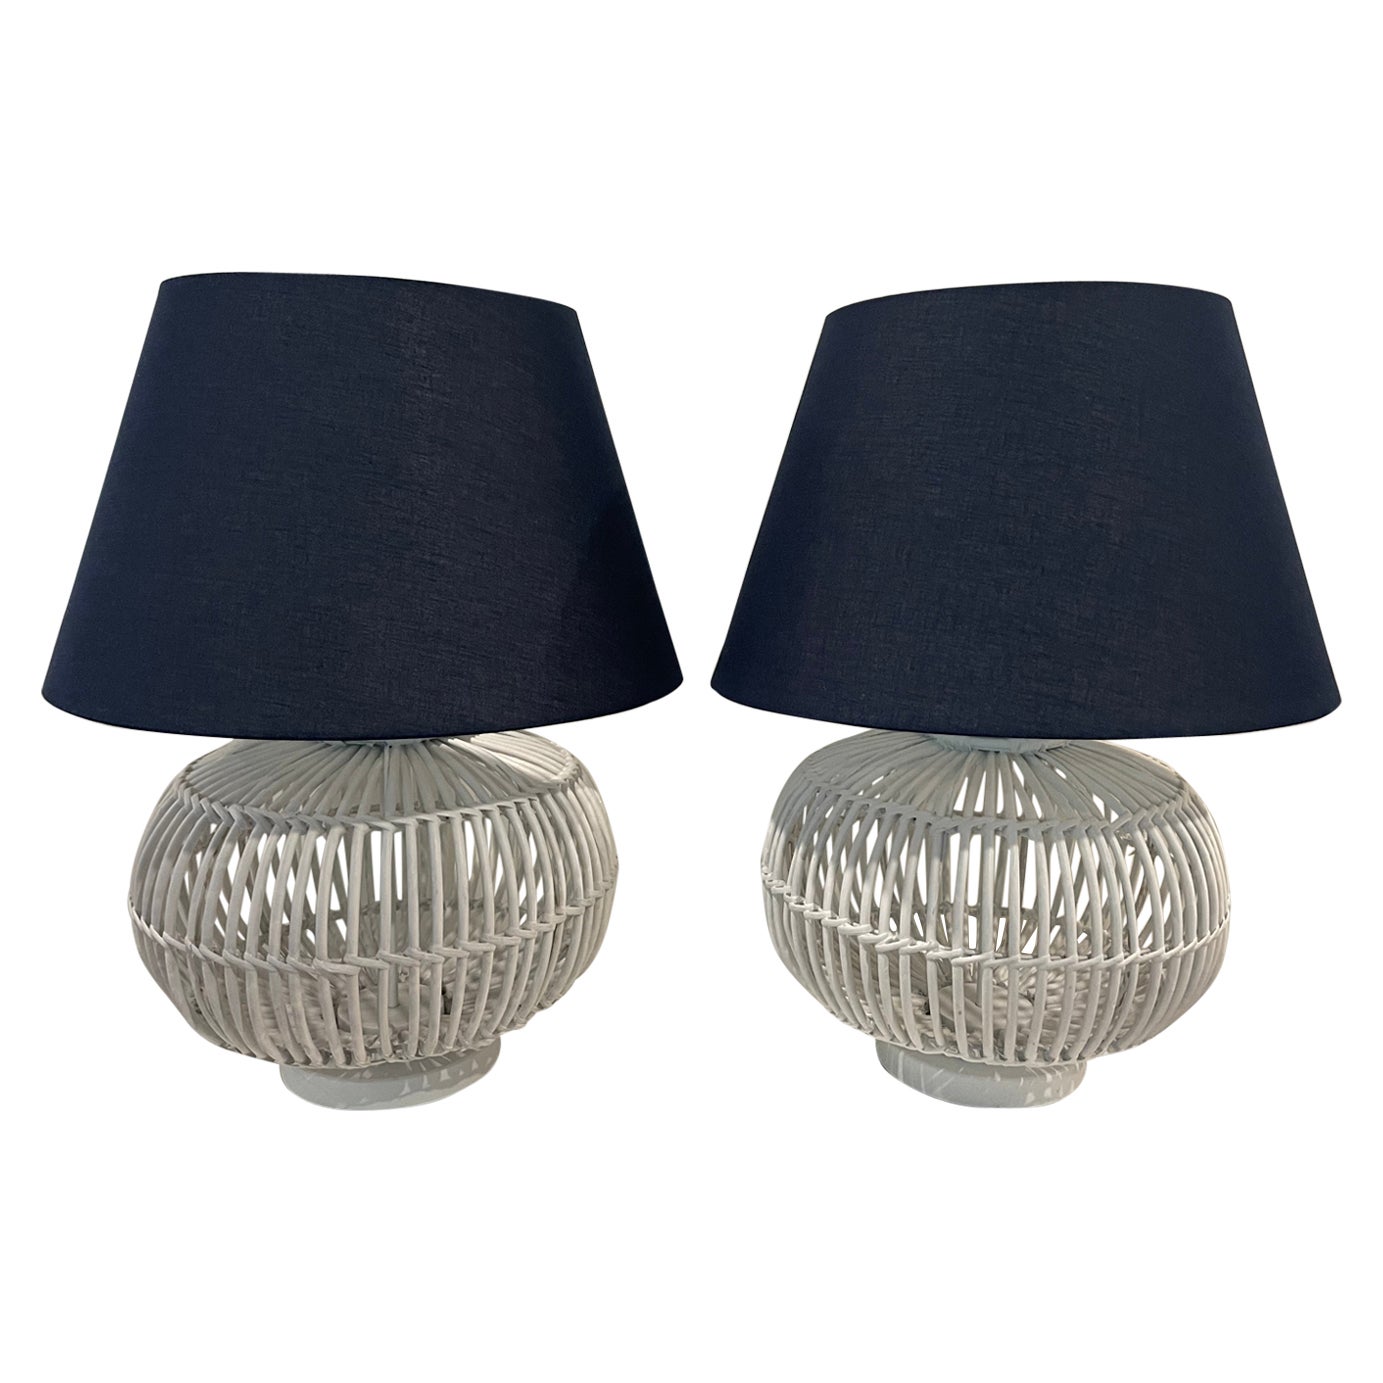 Lauren Ralph Lauren White Rattan Table Lamps With Navy Shades - a Pair For Sale